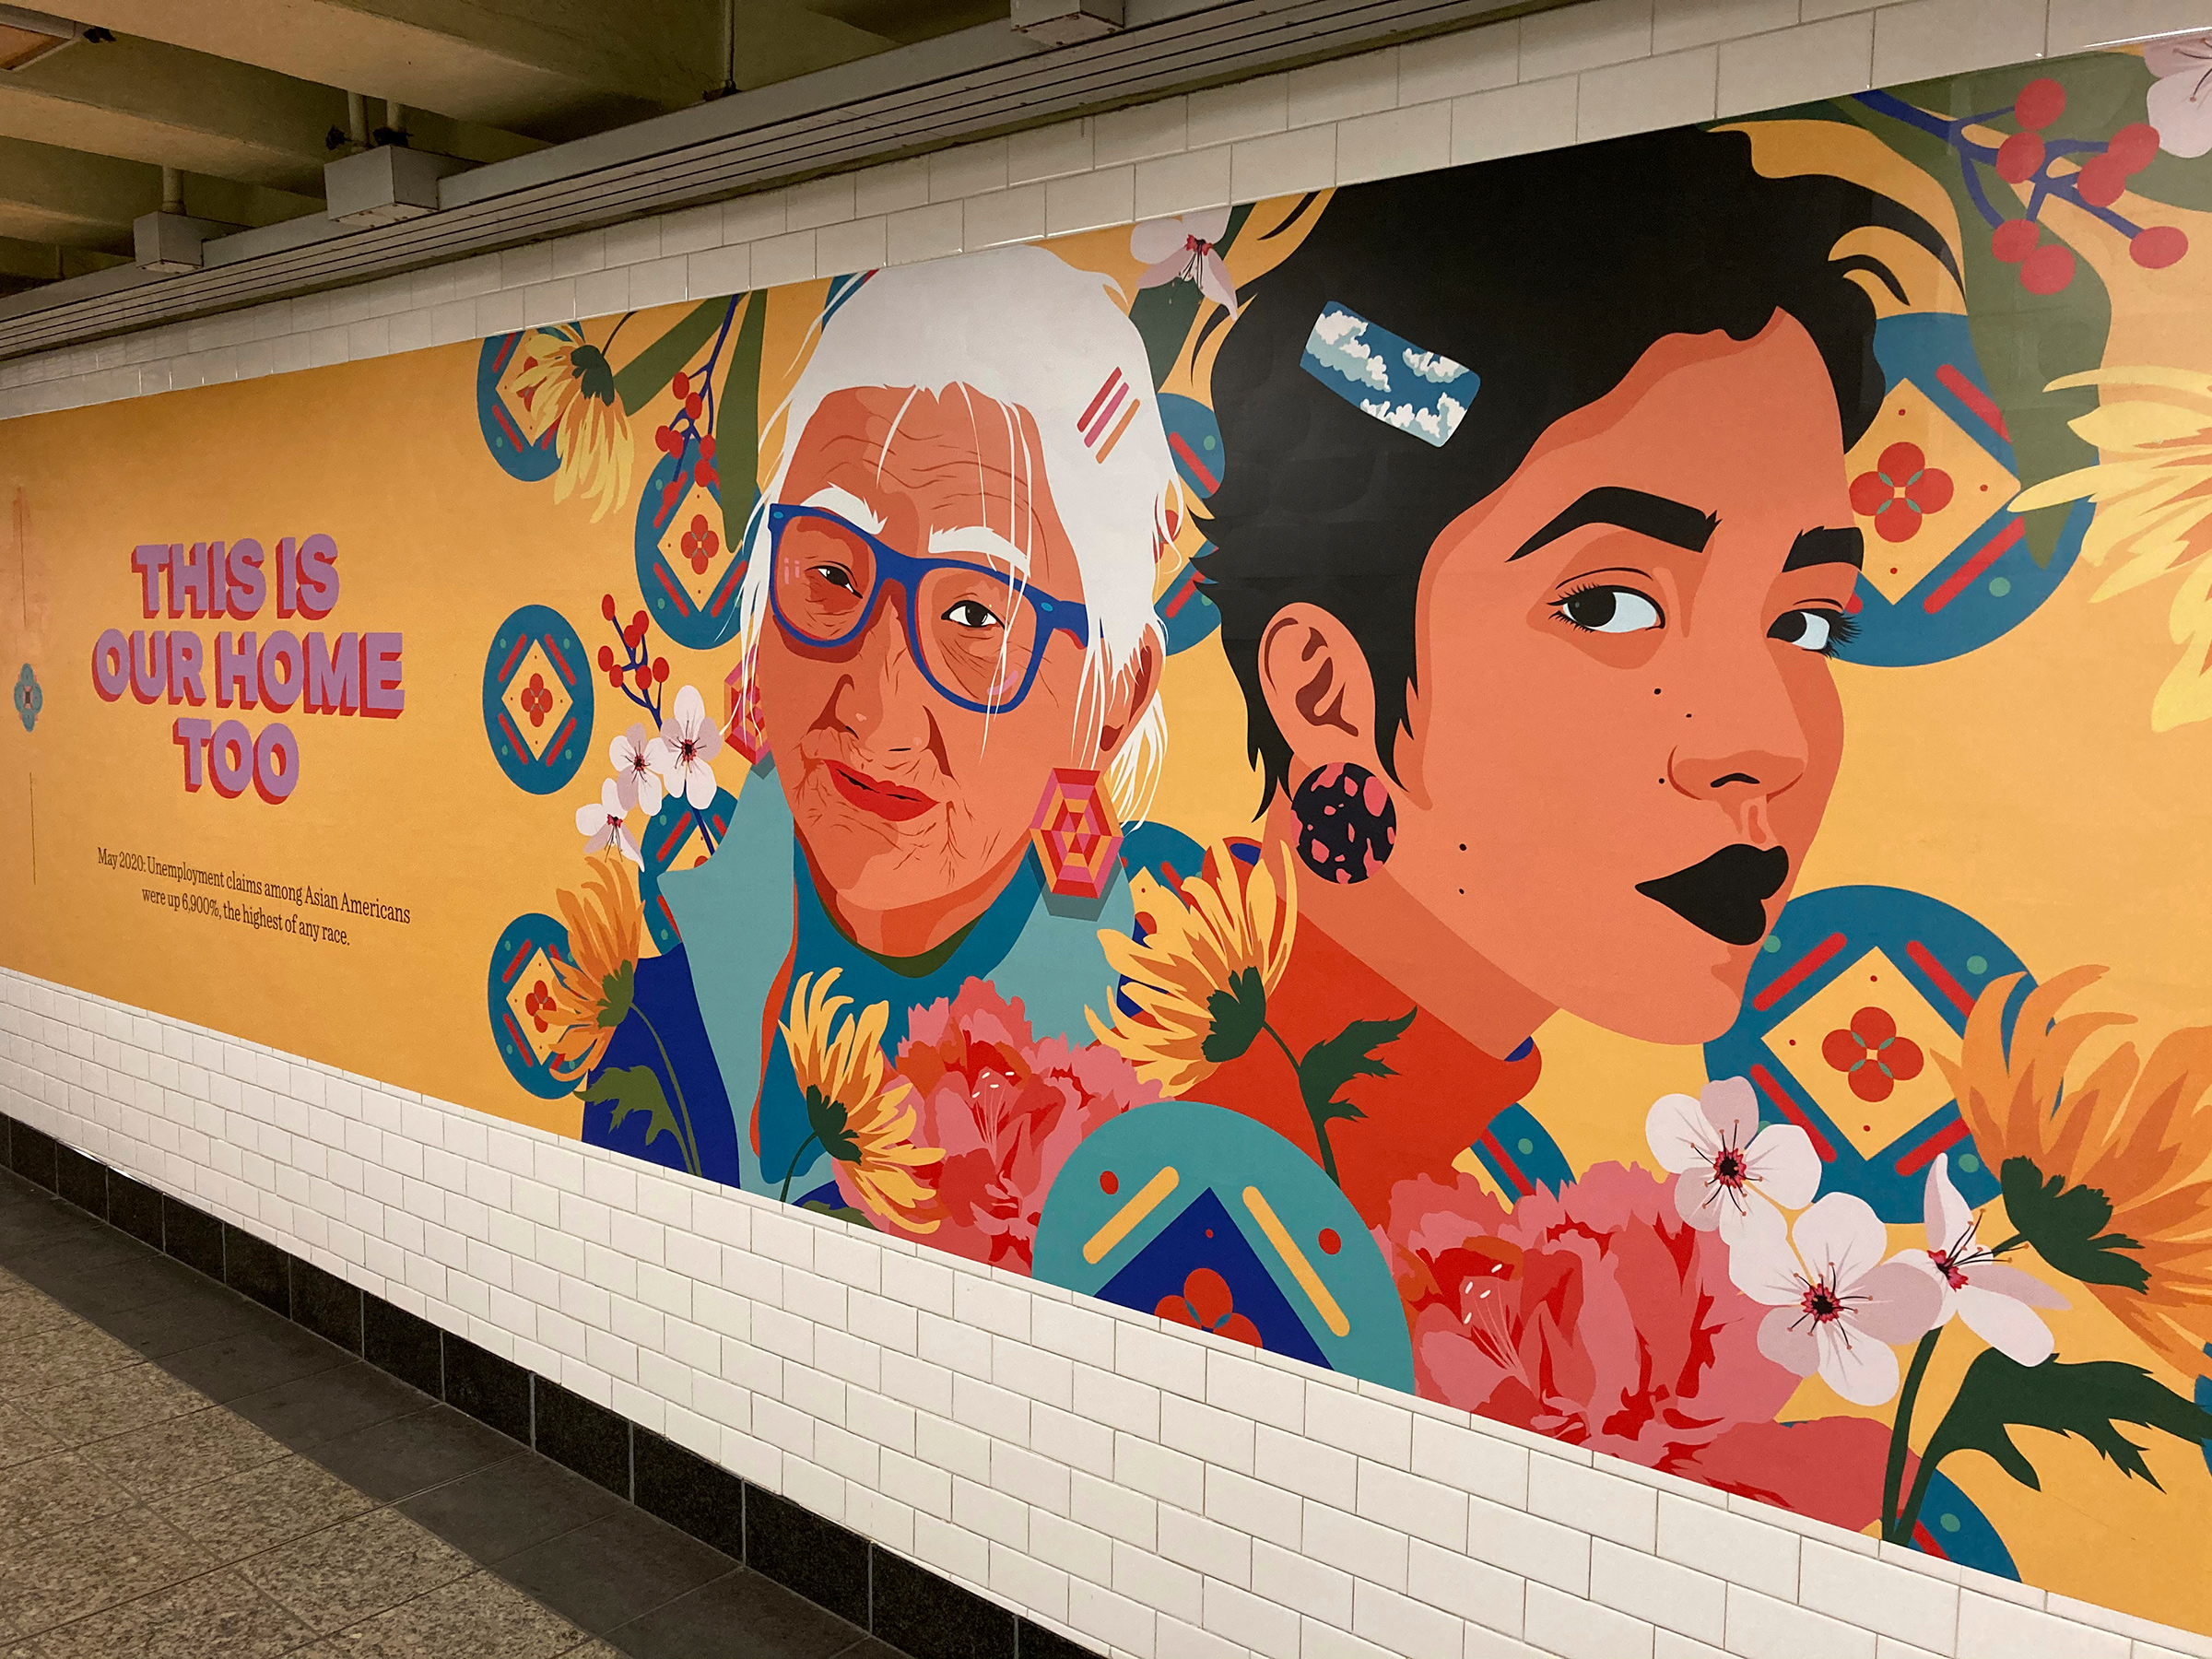 Posters against racism towards Asian Americans are seen at the subway station at Barclays Center in Brooklyn, Jan. 1